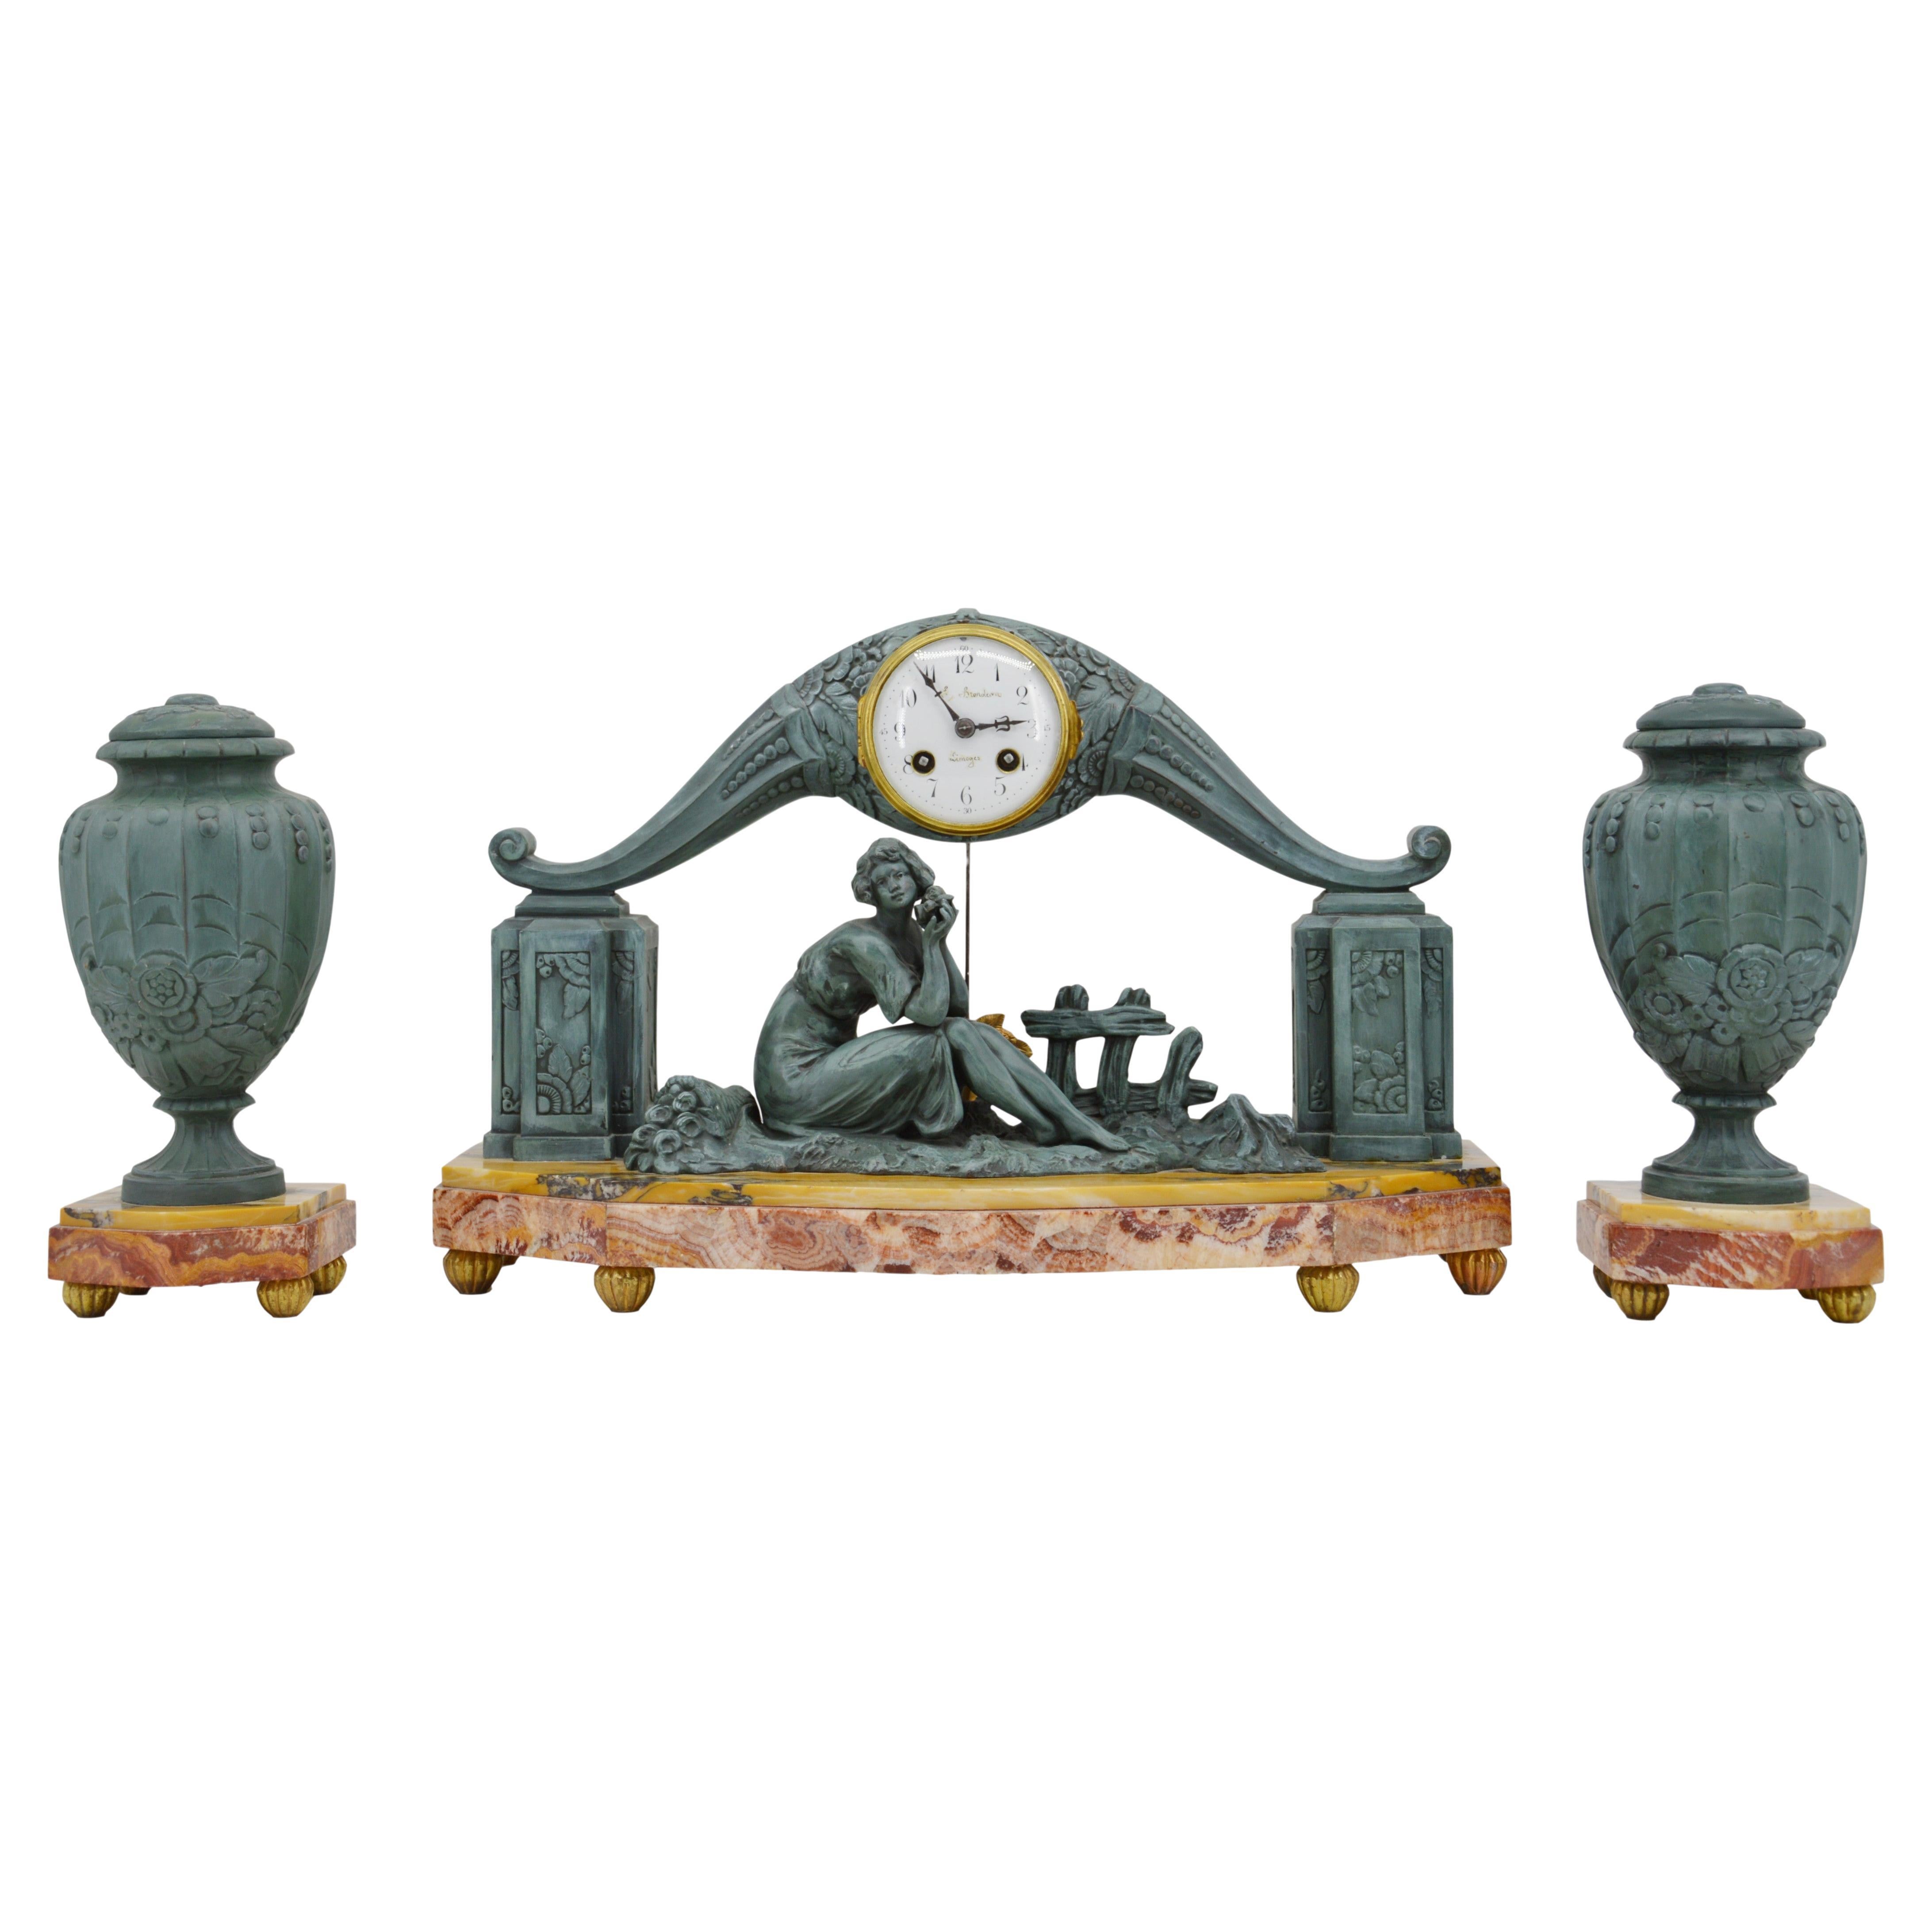 French Art Deco Mantel Clock Set by Limousin, 1920s